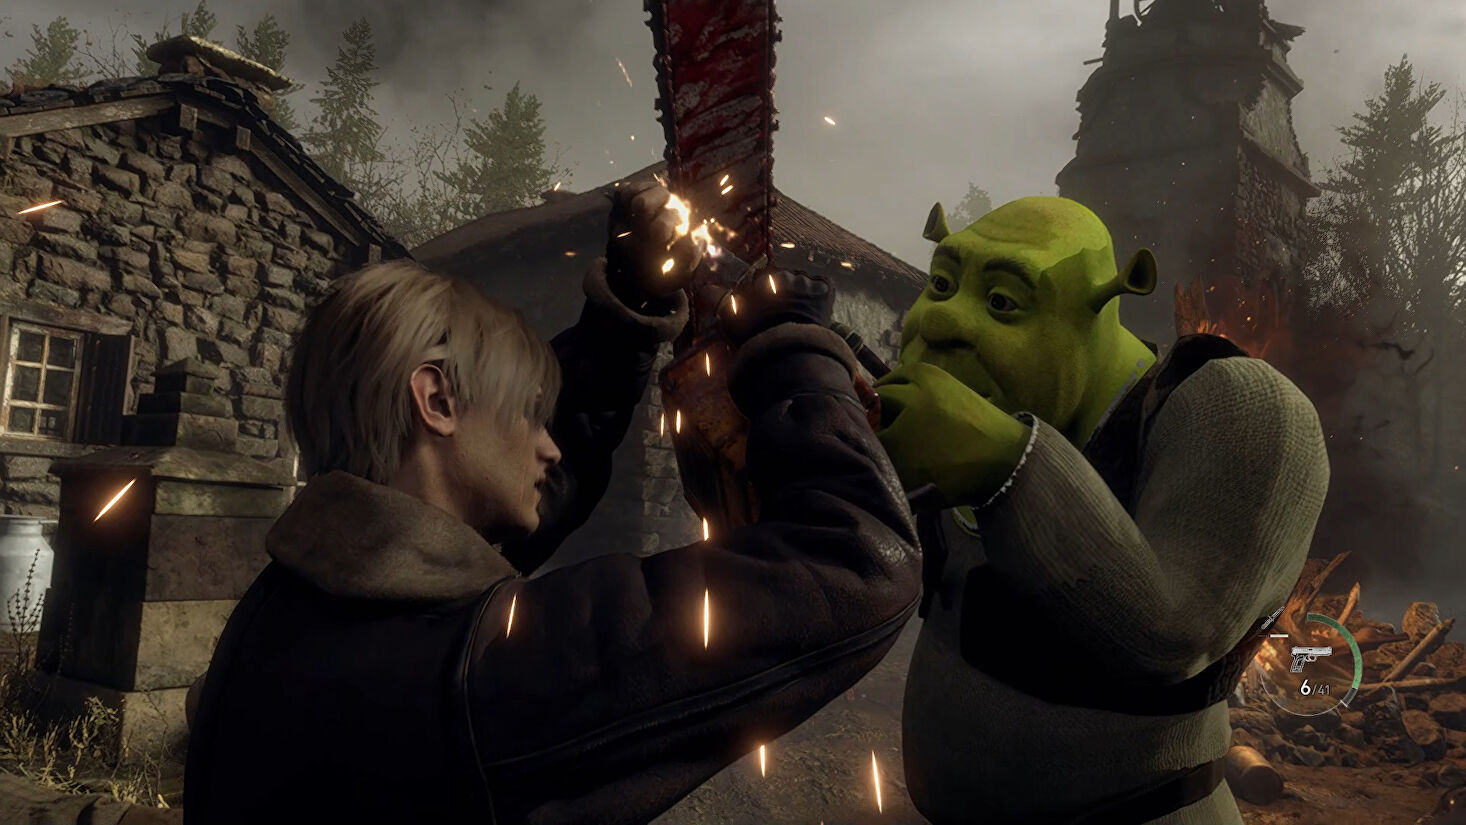 Fight chainsaw-wielding Shrek in this Resident Evil 4 demo mod